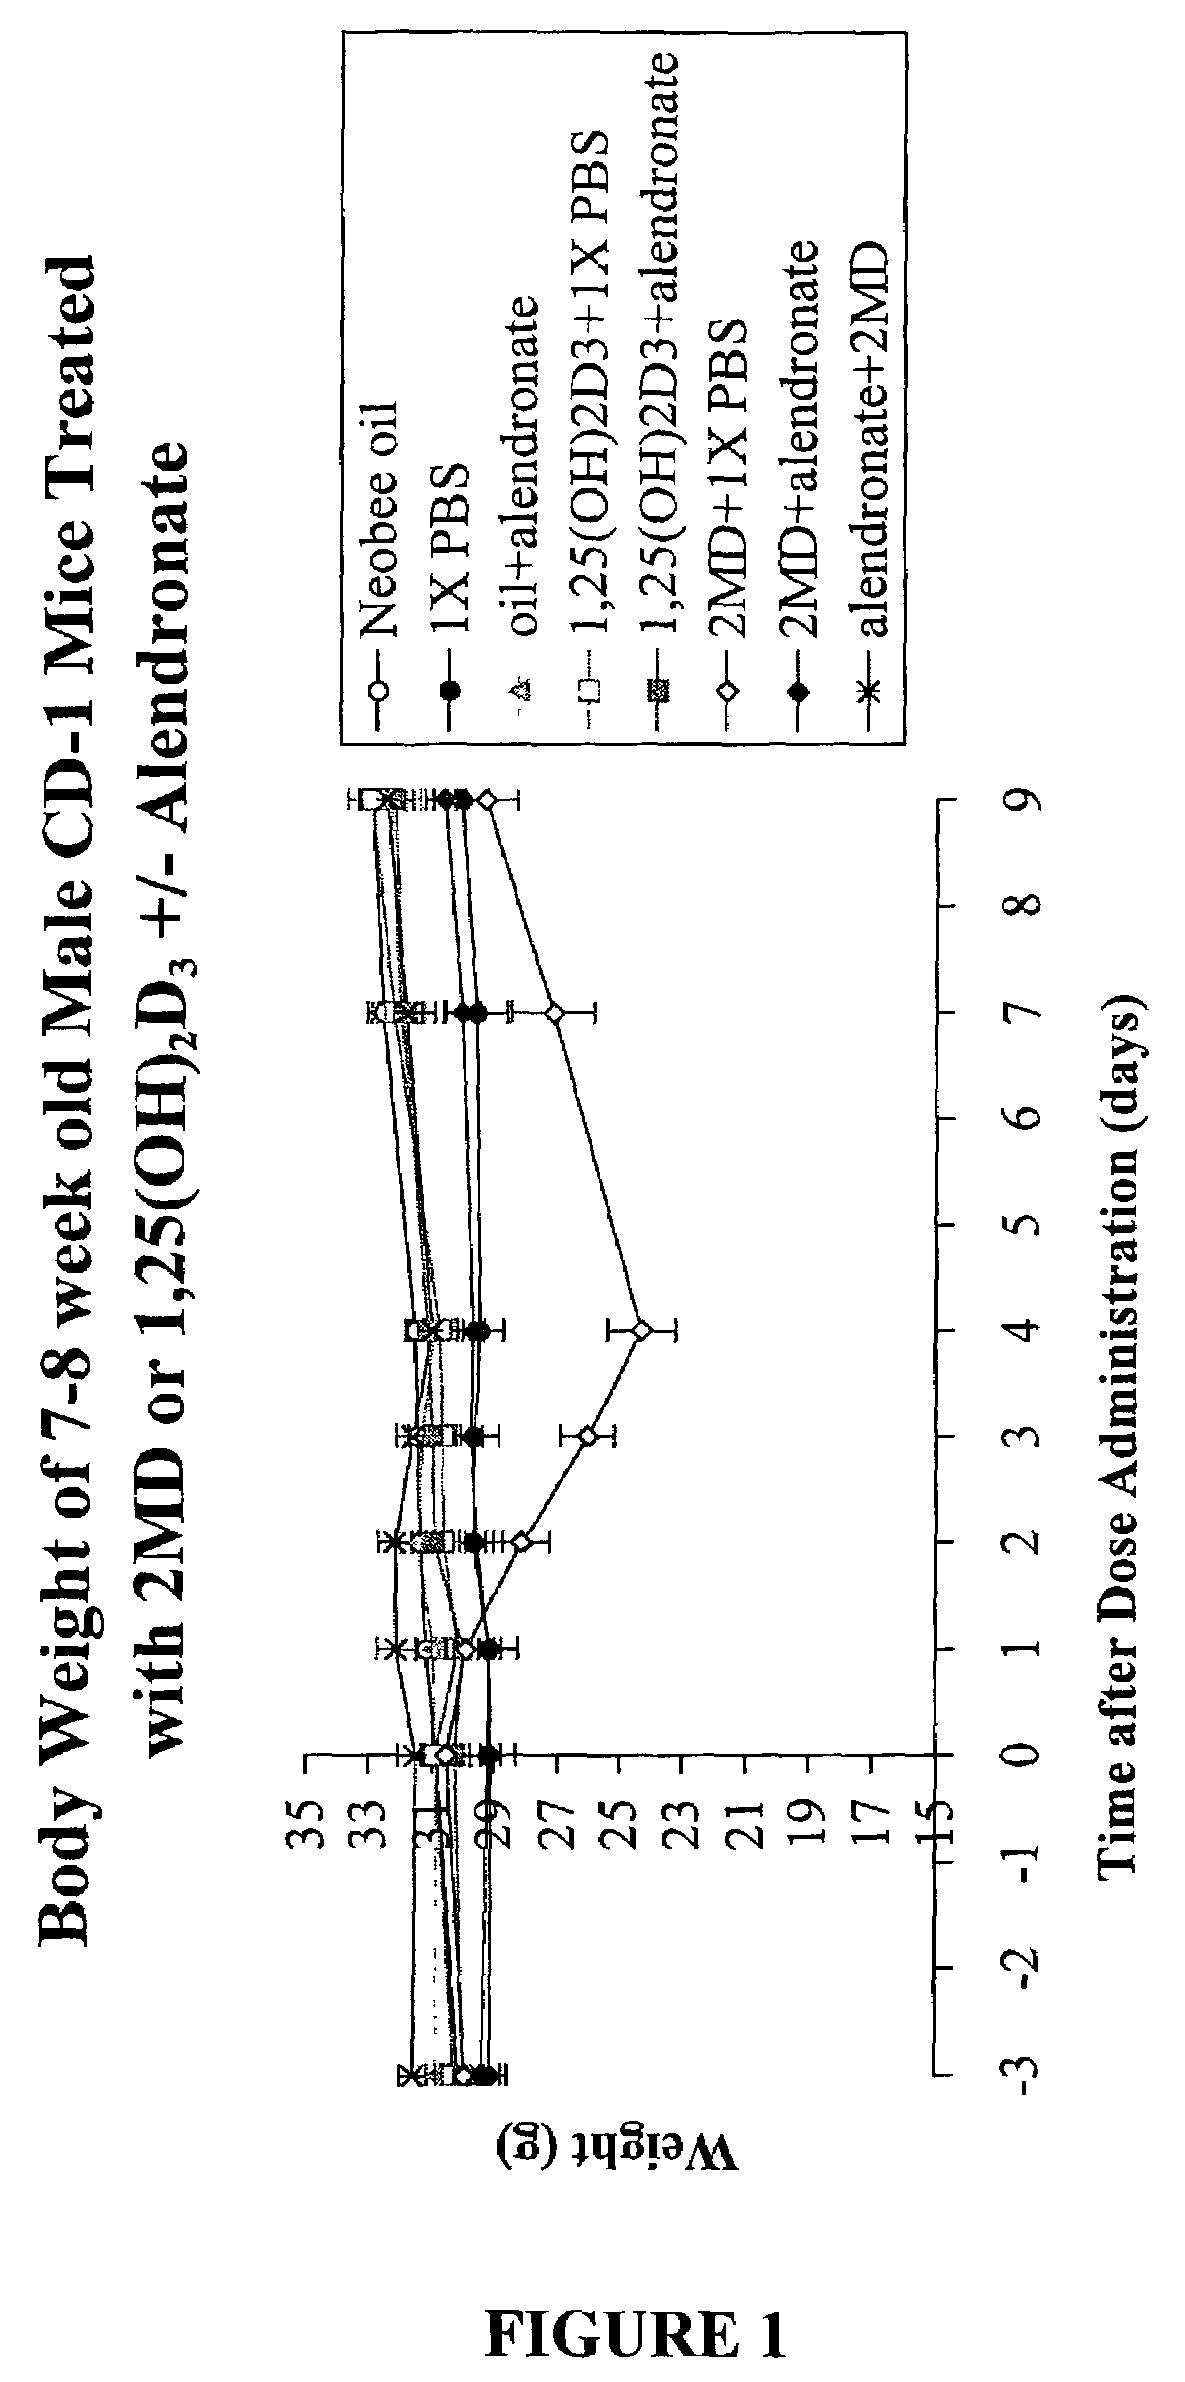 Method of extending the dose range of vitamin D compounds